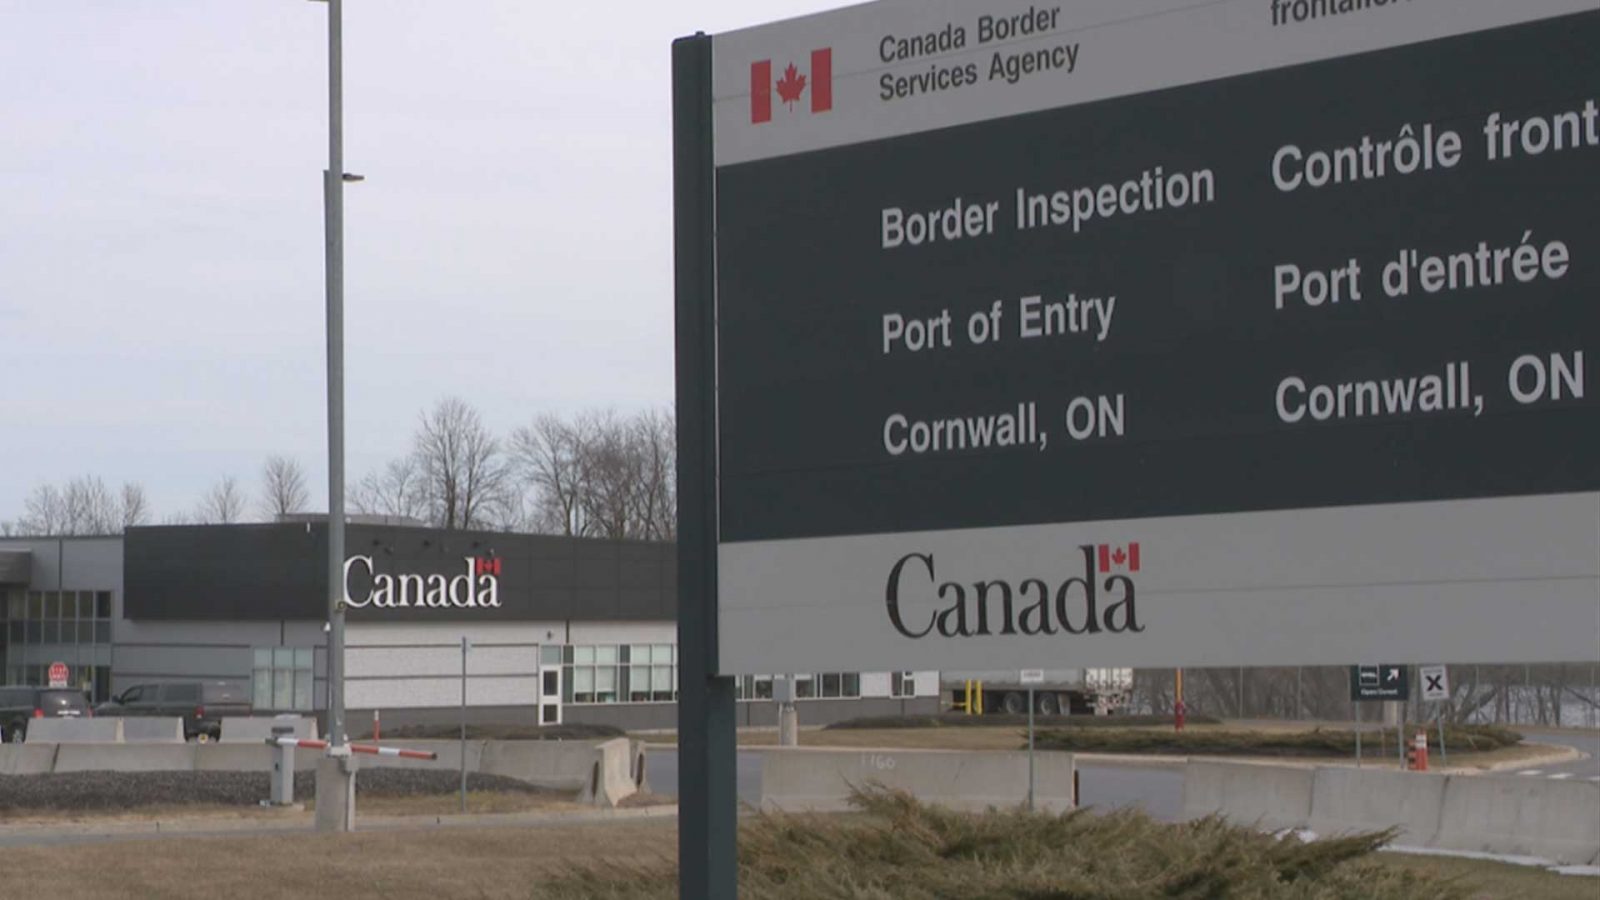 Crossing the border this summer: The CBSA provides tips this Victoria Day long weekend to help ensure a smoother trip for all travellers